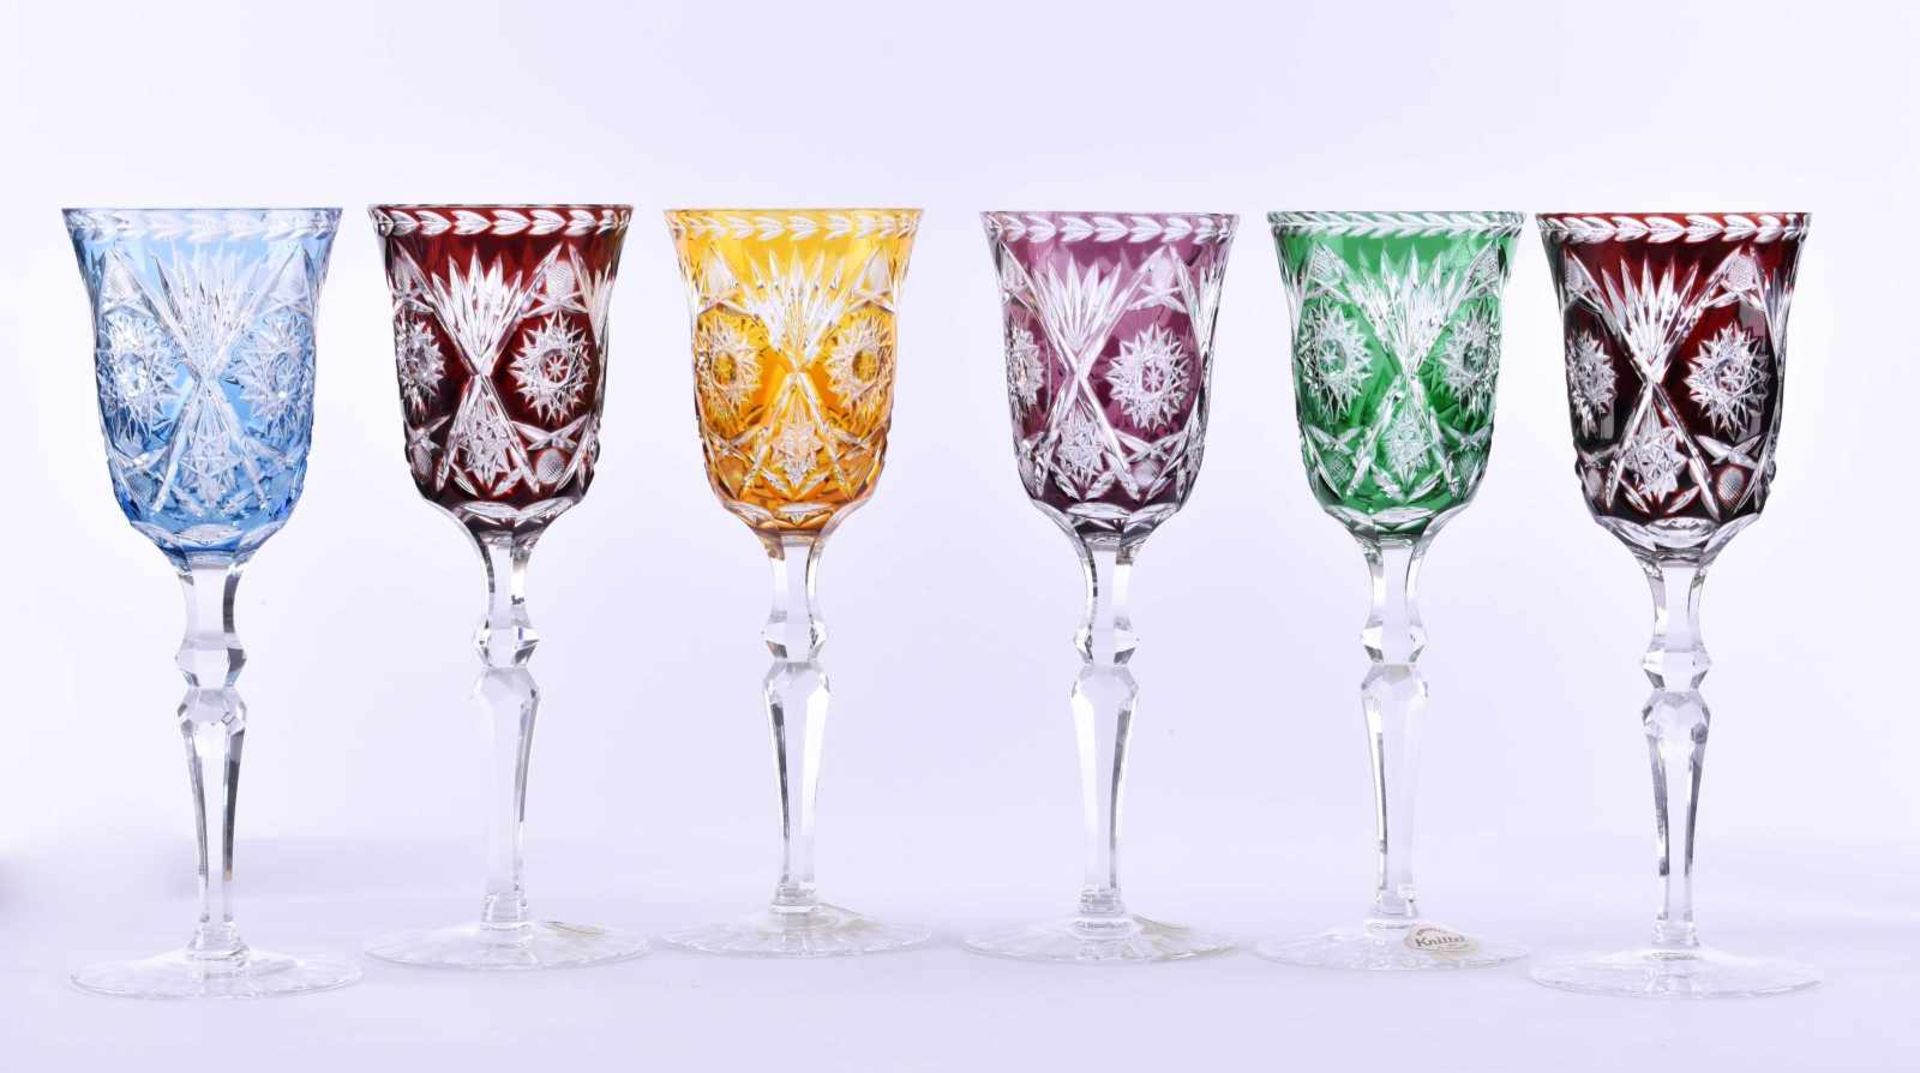 A group of white wine glasses6 pieces, different colors, Knittel lead crystal, handmade, height: